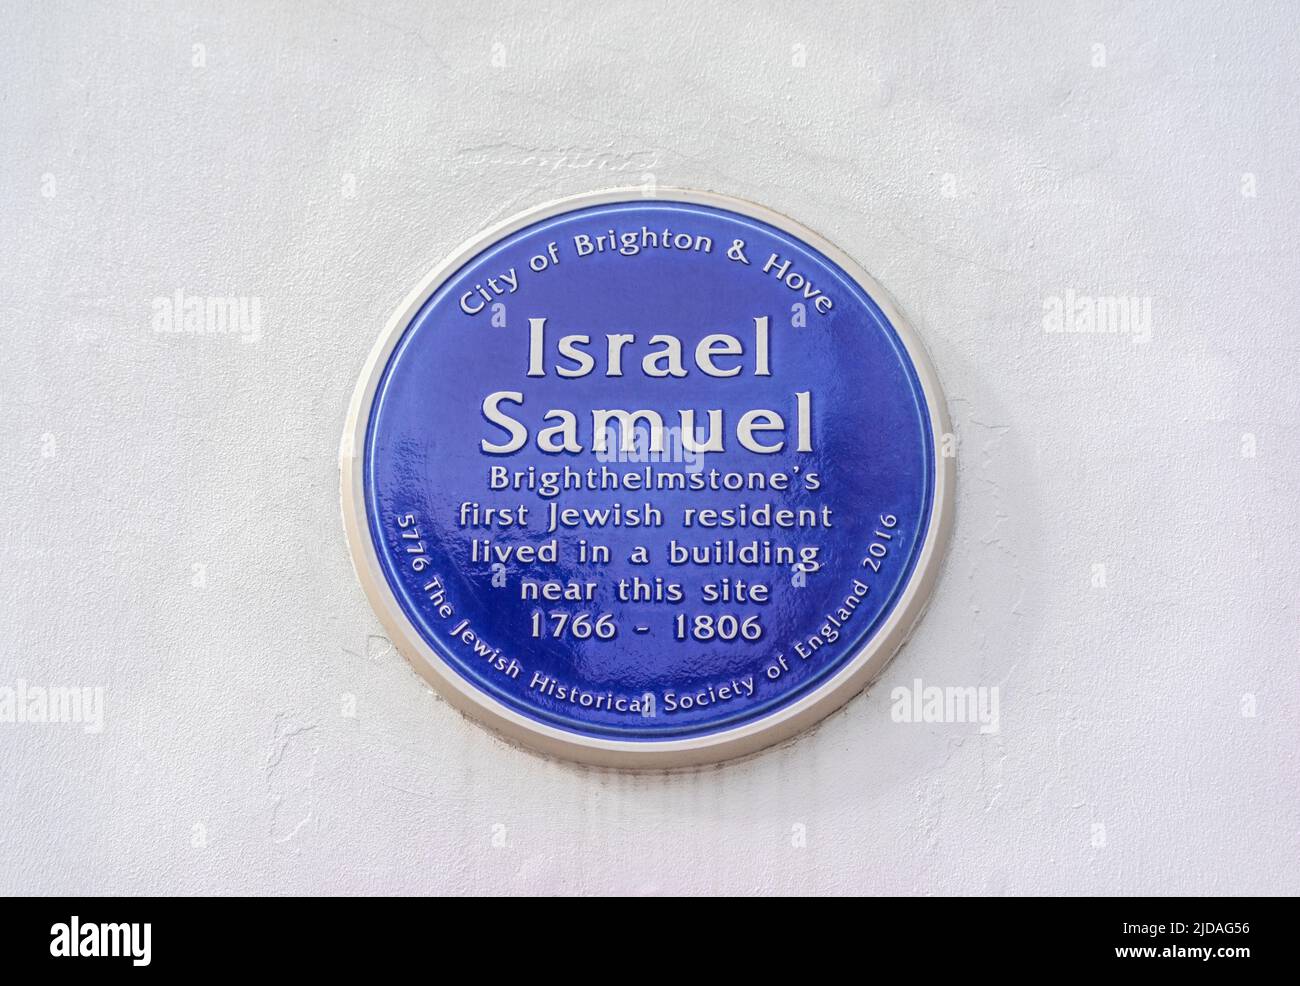 Commemorative blue plaque for Israel Samuel, first Jewish resident of Brighton, honoured by the Jewish Historical Society of England, East Sussex, UK Stock Photo